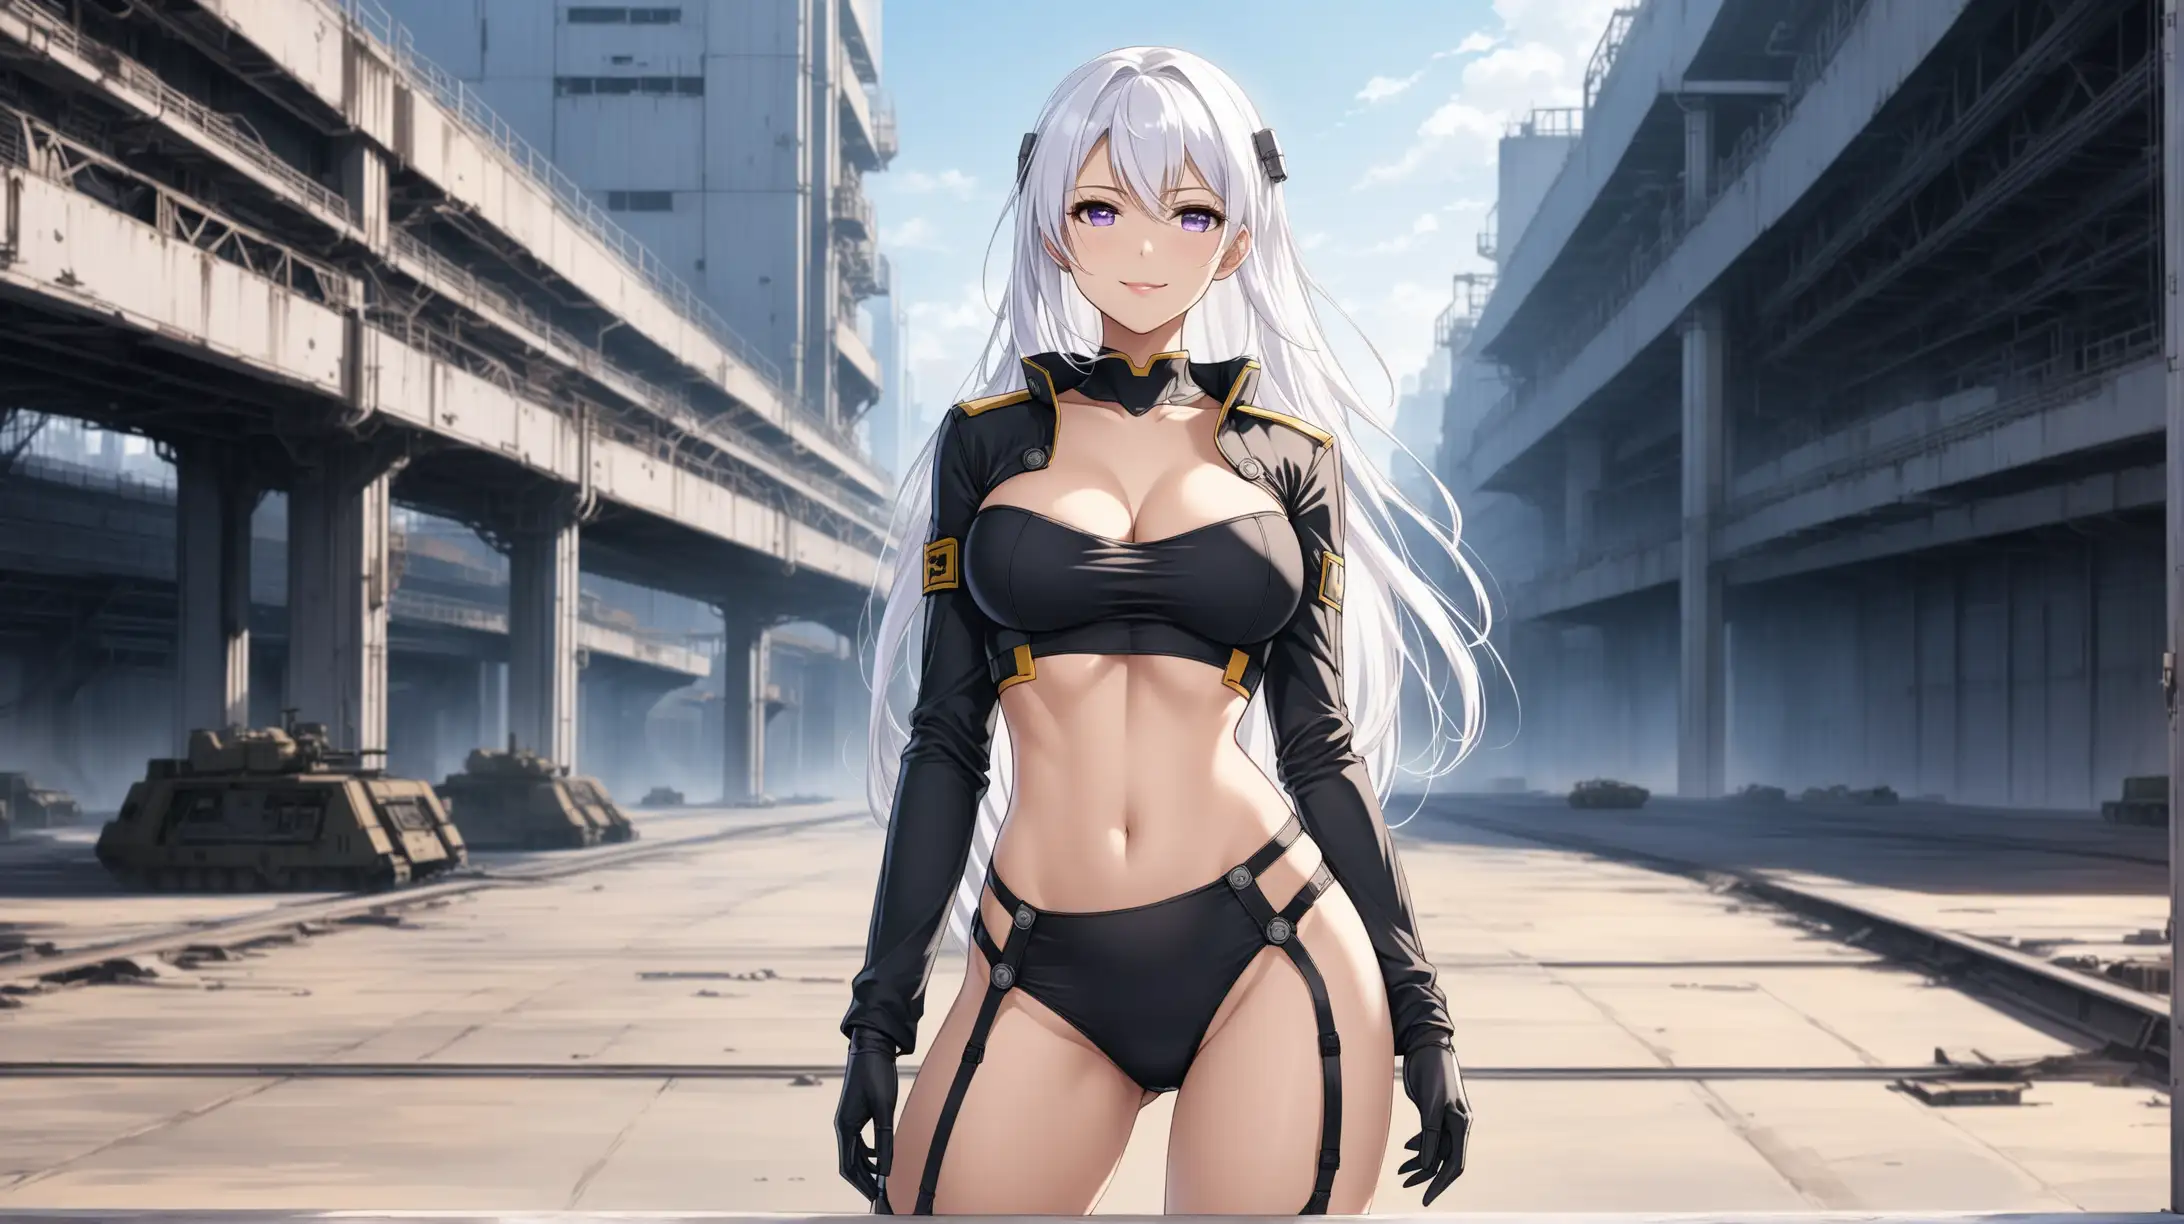 Draw the character Enterprise from Azur Lane, pale violet eyes, white hair, high quality, natural lighting, long shot, outdoors, seductive pose, outfit inspired from the Fallout series, urban setting, smiling at the viewer